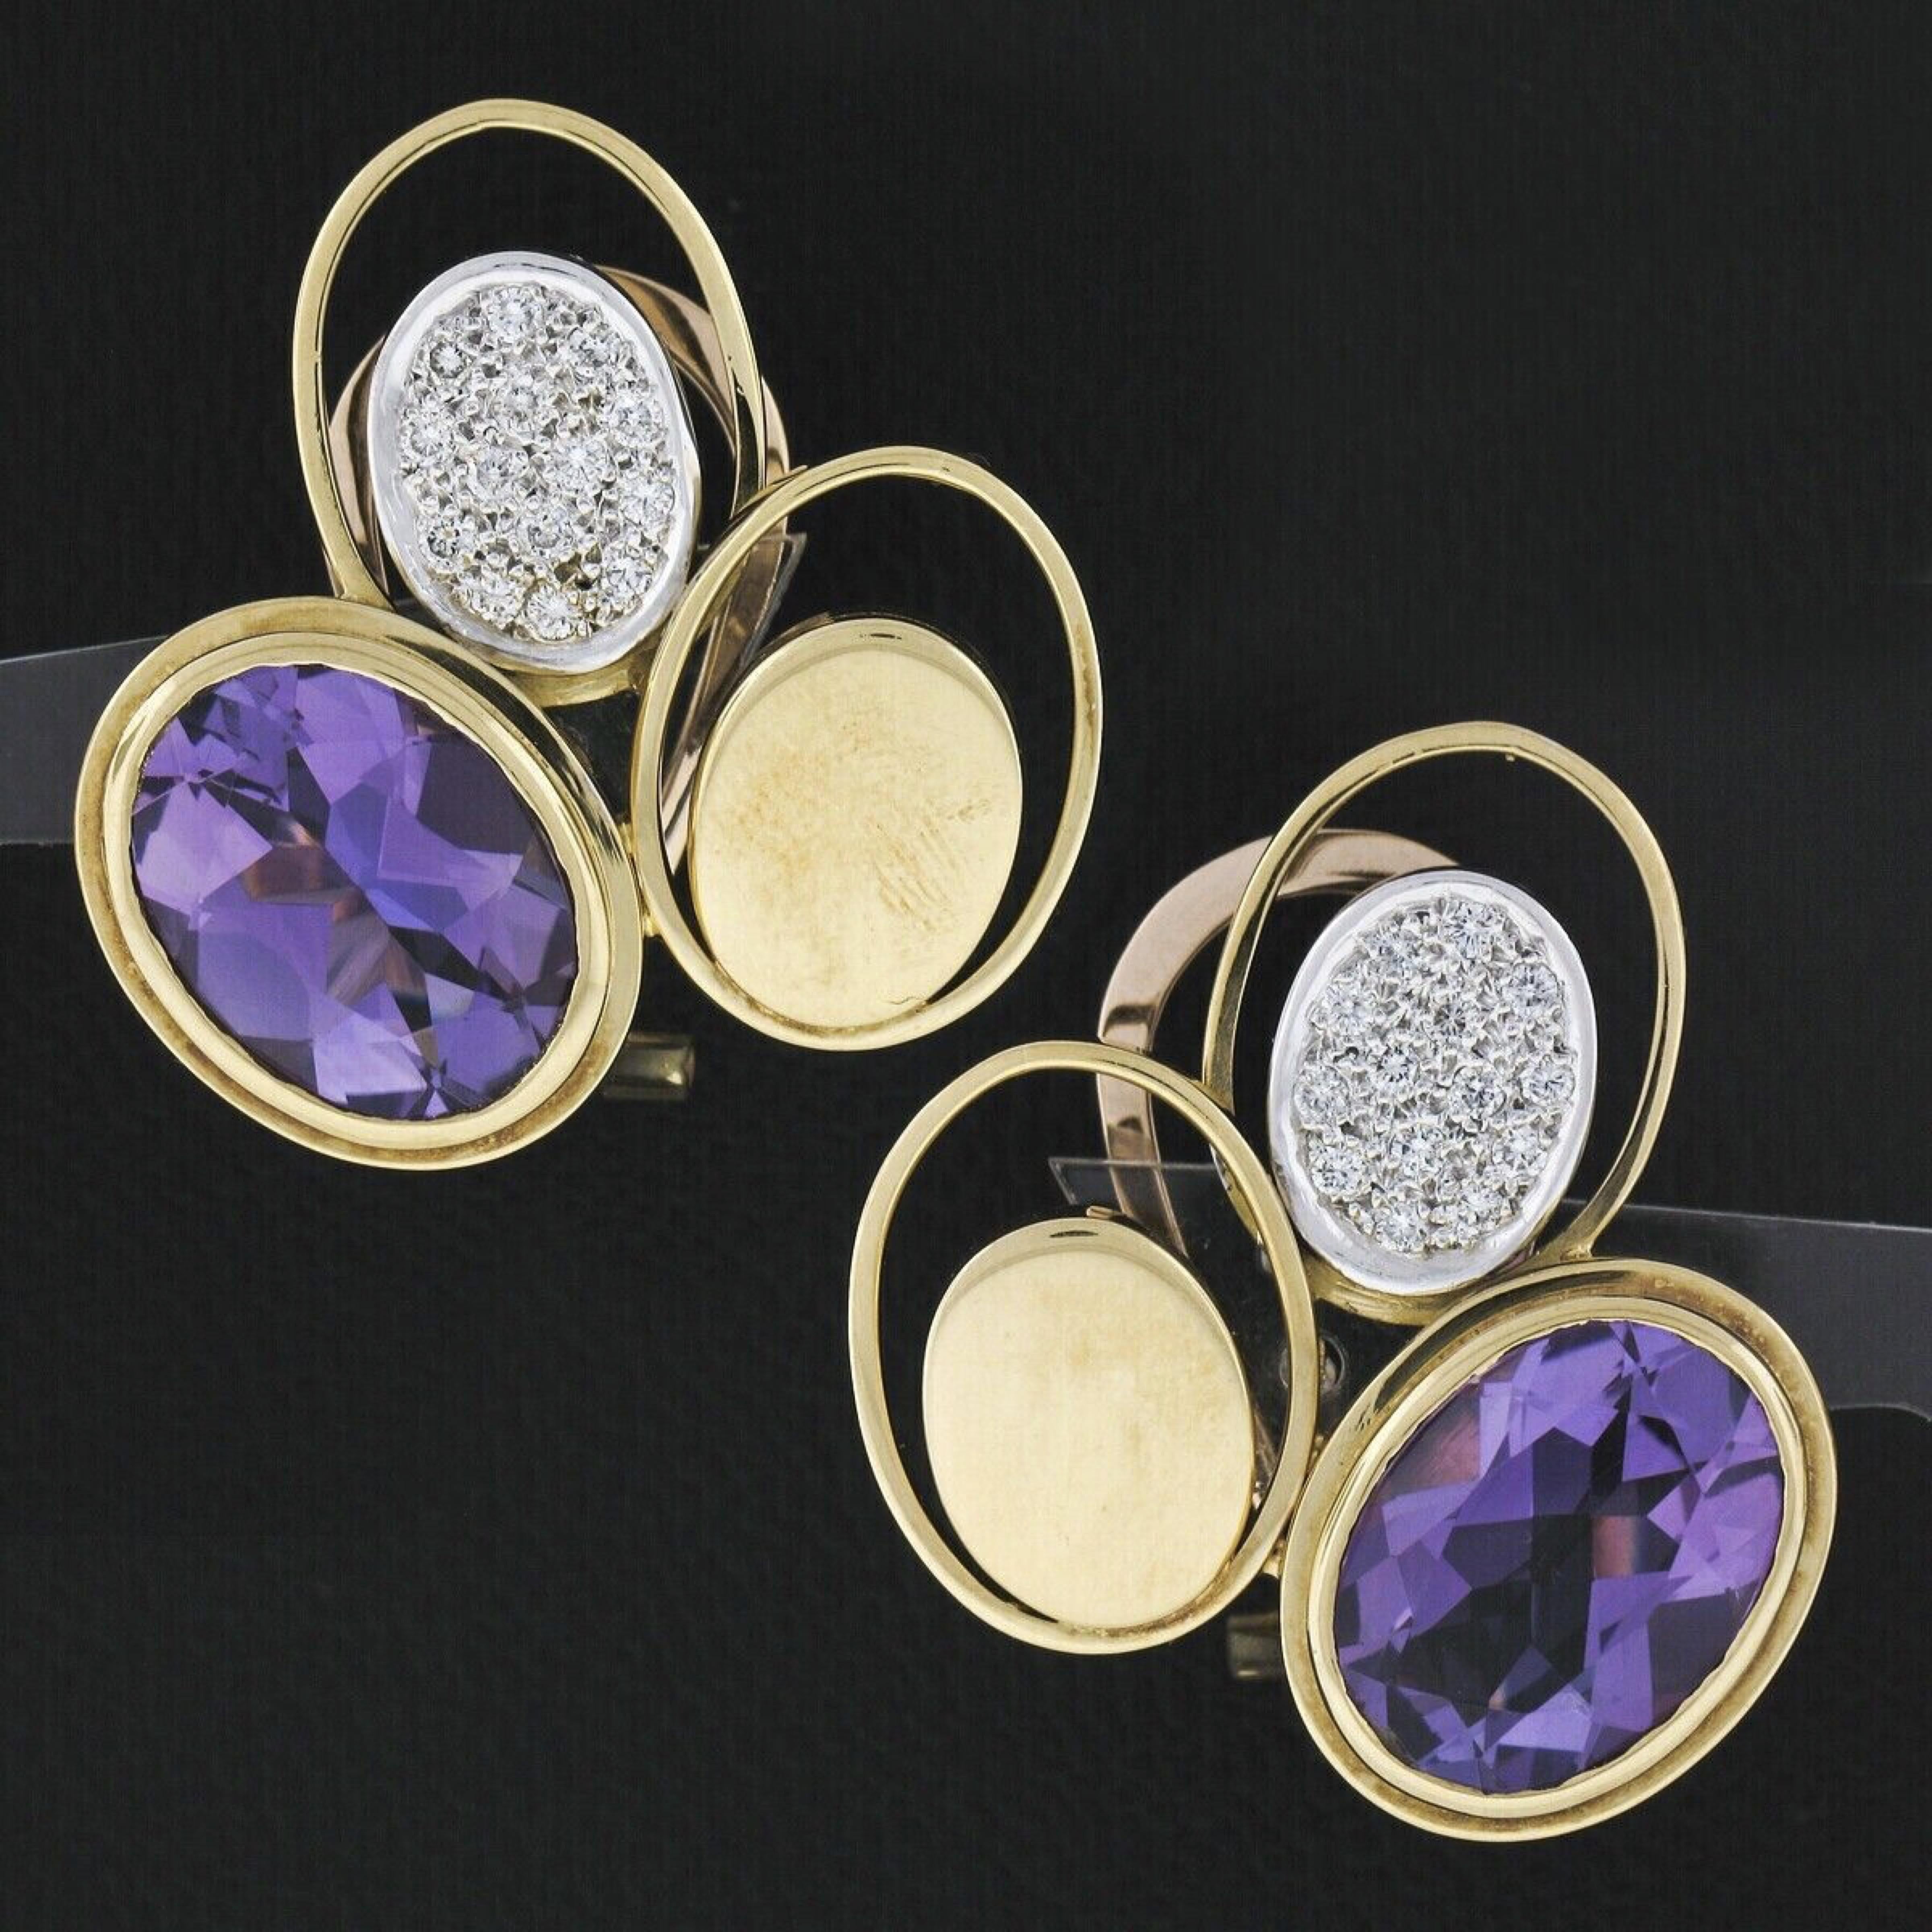 This magnificent, very well made pair of vintage earrings was crafted from solid 18k gold and features a pair of oval brilliant amethyst stones weighing approximately 13 full carats, and display a gorgeous, rich and subtle royal purple color. The